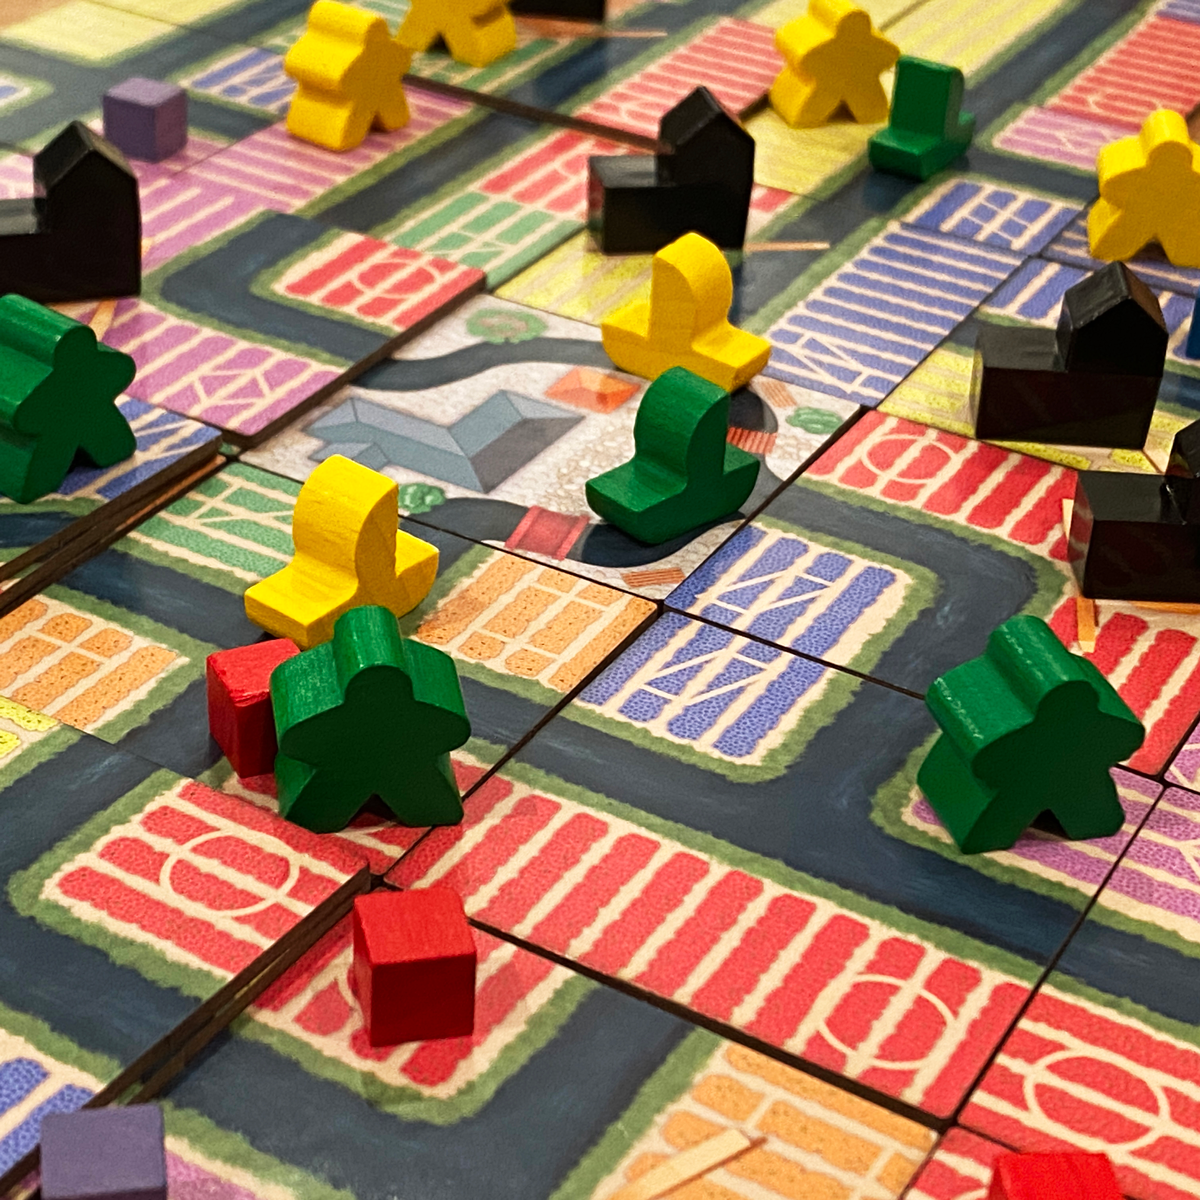 The busy canals of Blooming Industry Image © Board Game Review UK